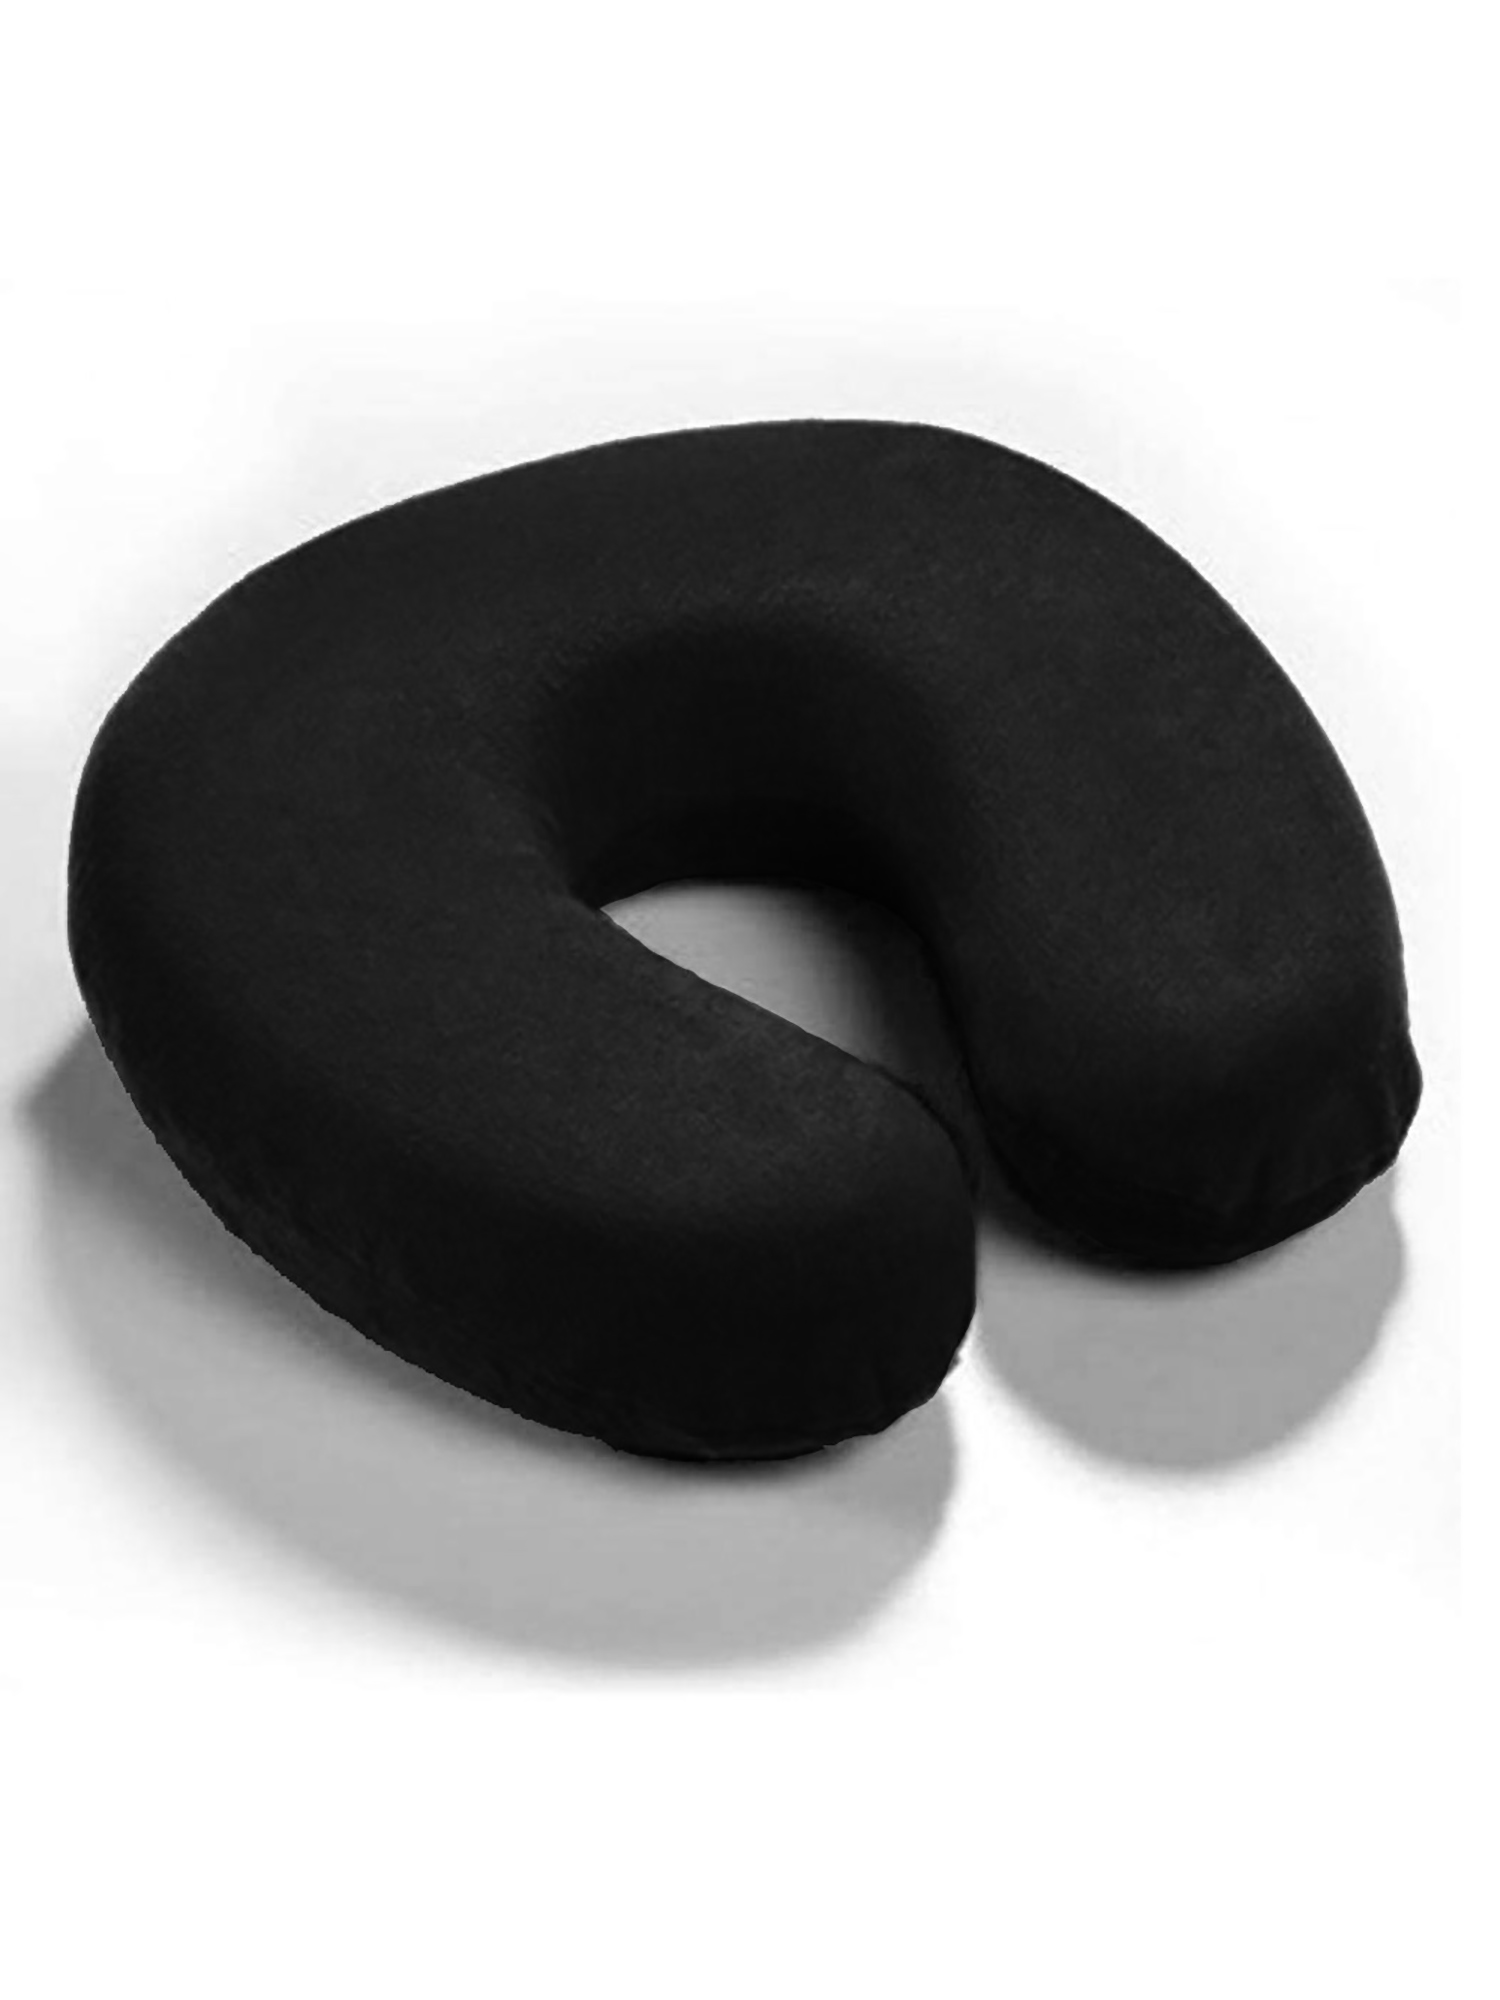 Travel Pillow Memory Foam Neck Cushion Support Rest Outdoors Car Flight - image 3 of 3